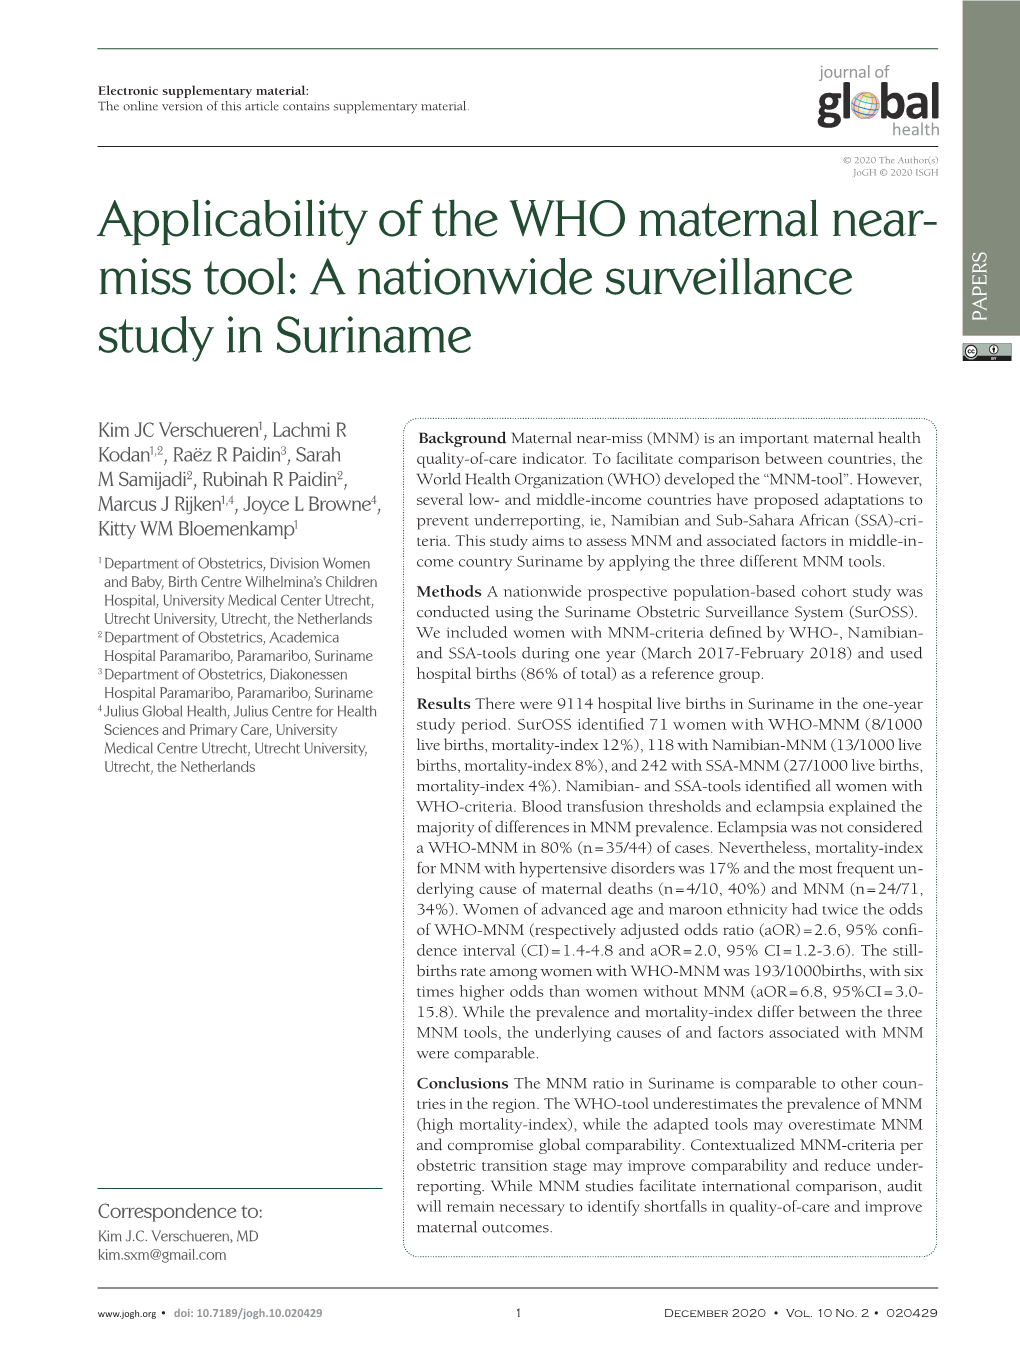 Applicability of the WHO Maternal Near- Miss Tool: a Nationwide Surveillance Study in Suriname PAPERS VIEWPOINTS